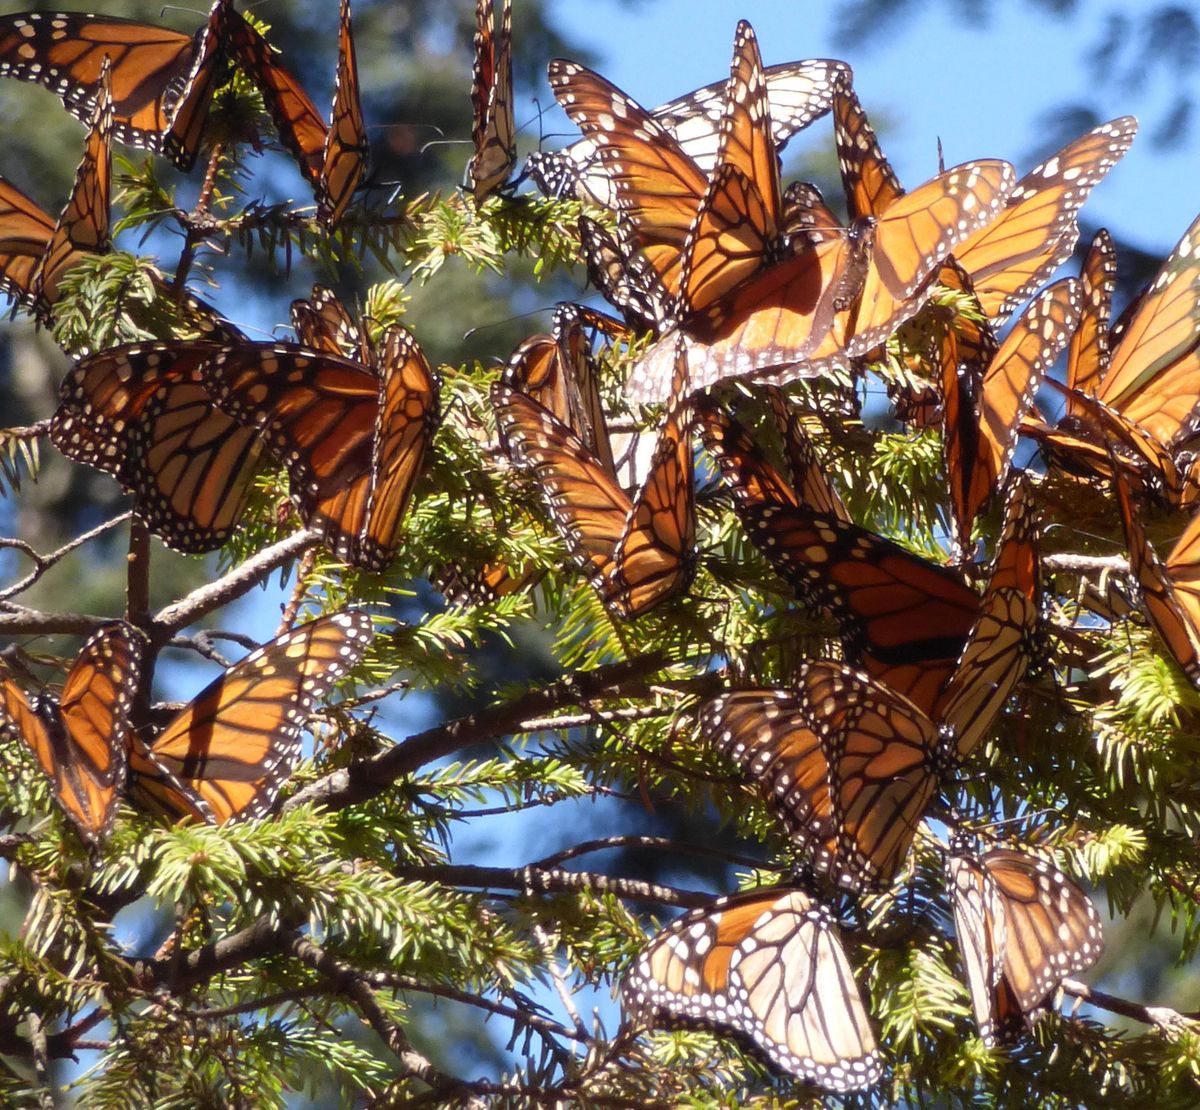 Monarch butterfly populations have been on the decline, but swarms of the colorful insects can still be found in certain parts of Mexico. ( (Terri Colby / TNS)